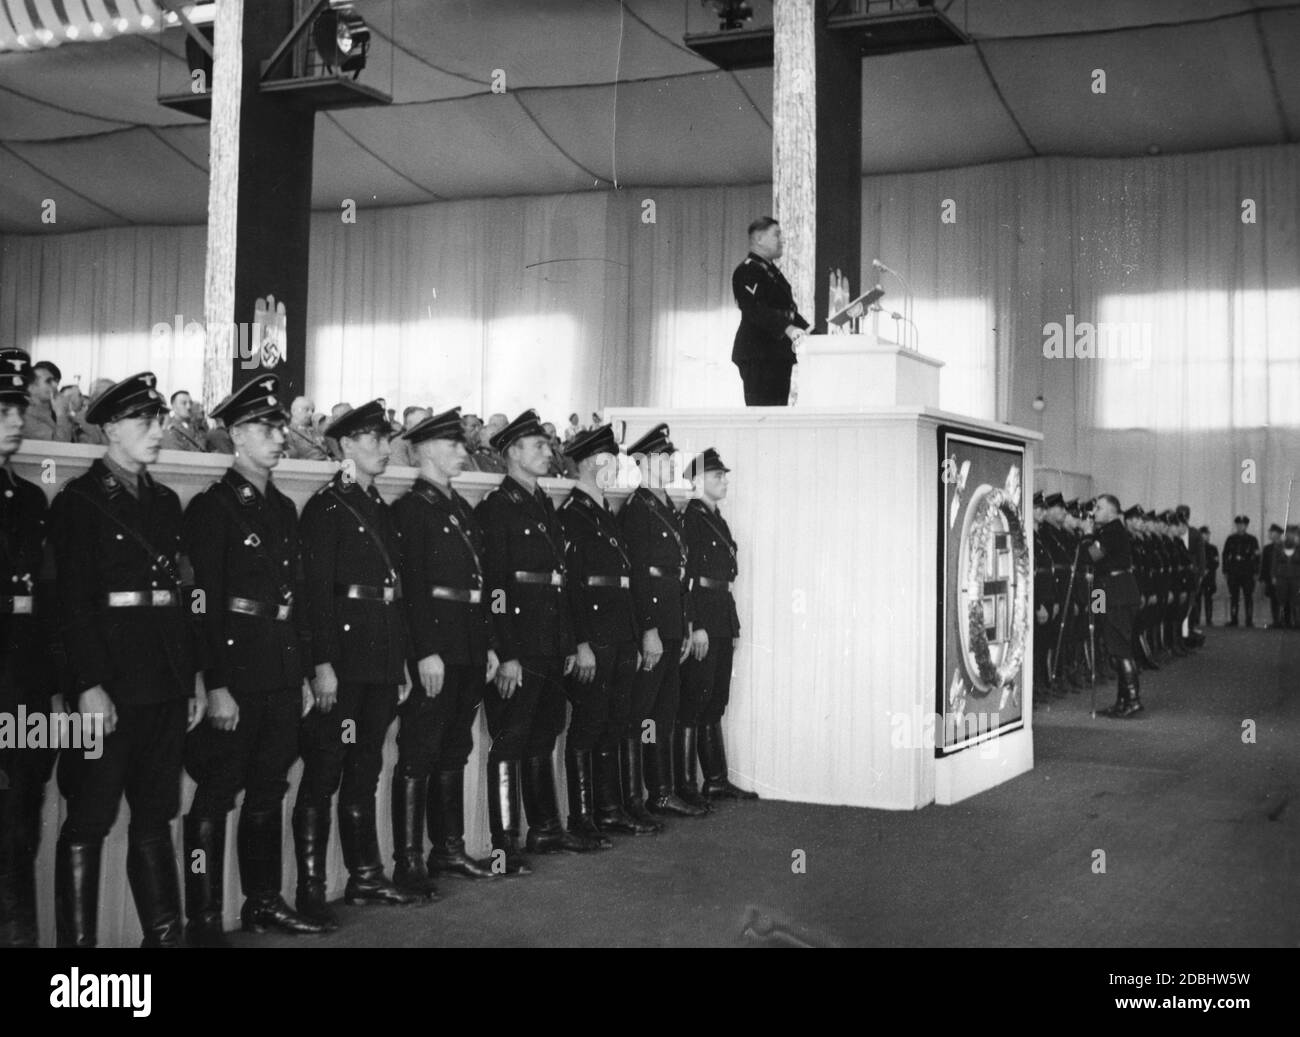 At the continuation of the NSDAP party congress in Nuremberg's Luitpoldhalle, the head of the Reichsnaehrstand (Reich Nutrition Office), Hermann Reischle is giving a speech. To the right of the speaker's podium is a photographer. Stock Photo